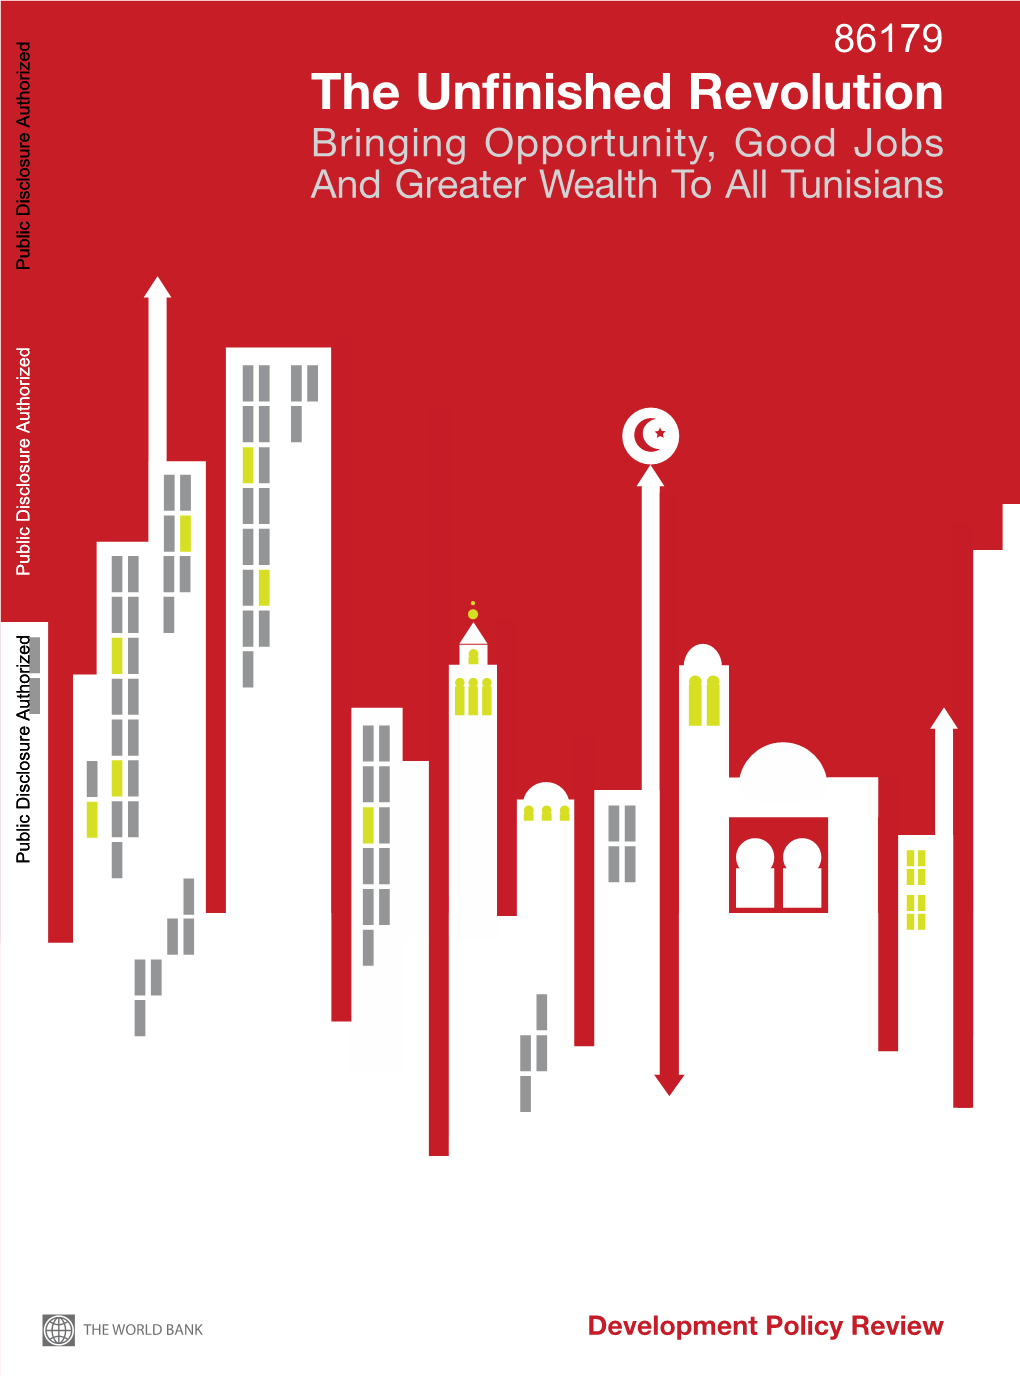 The Unfinished Revolution Bringing Opportunity, Good Jobs and Greater Wealth to All Tunisians May 2014